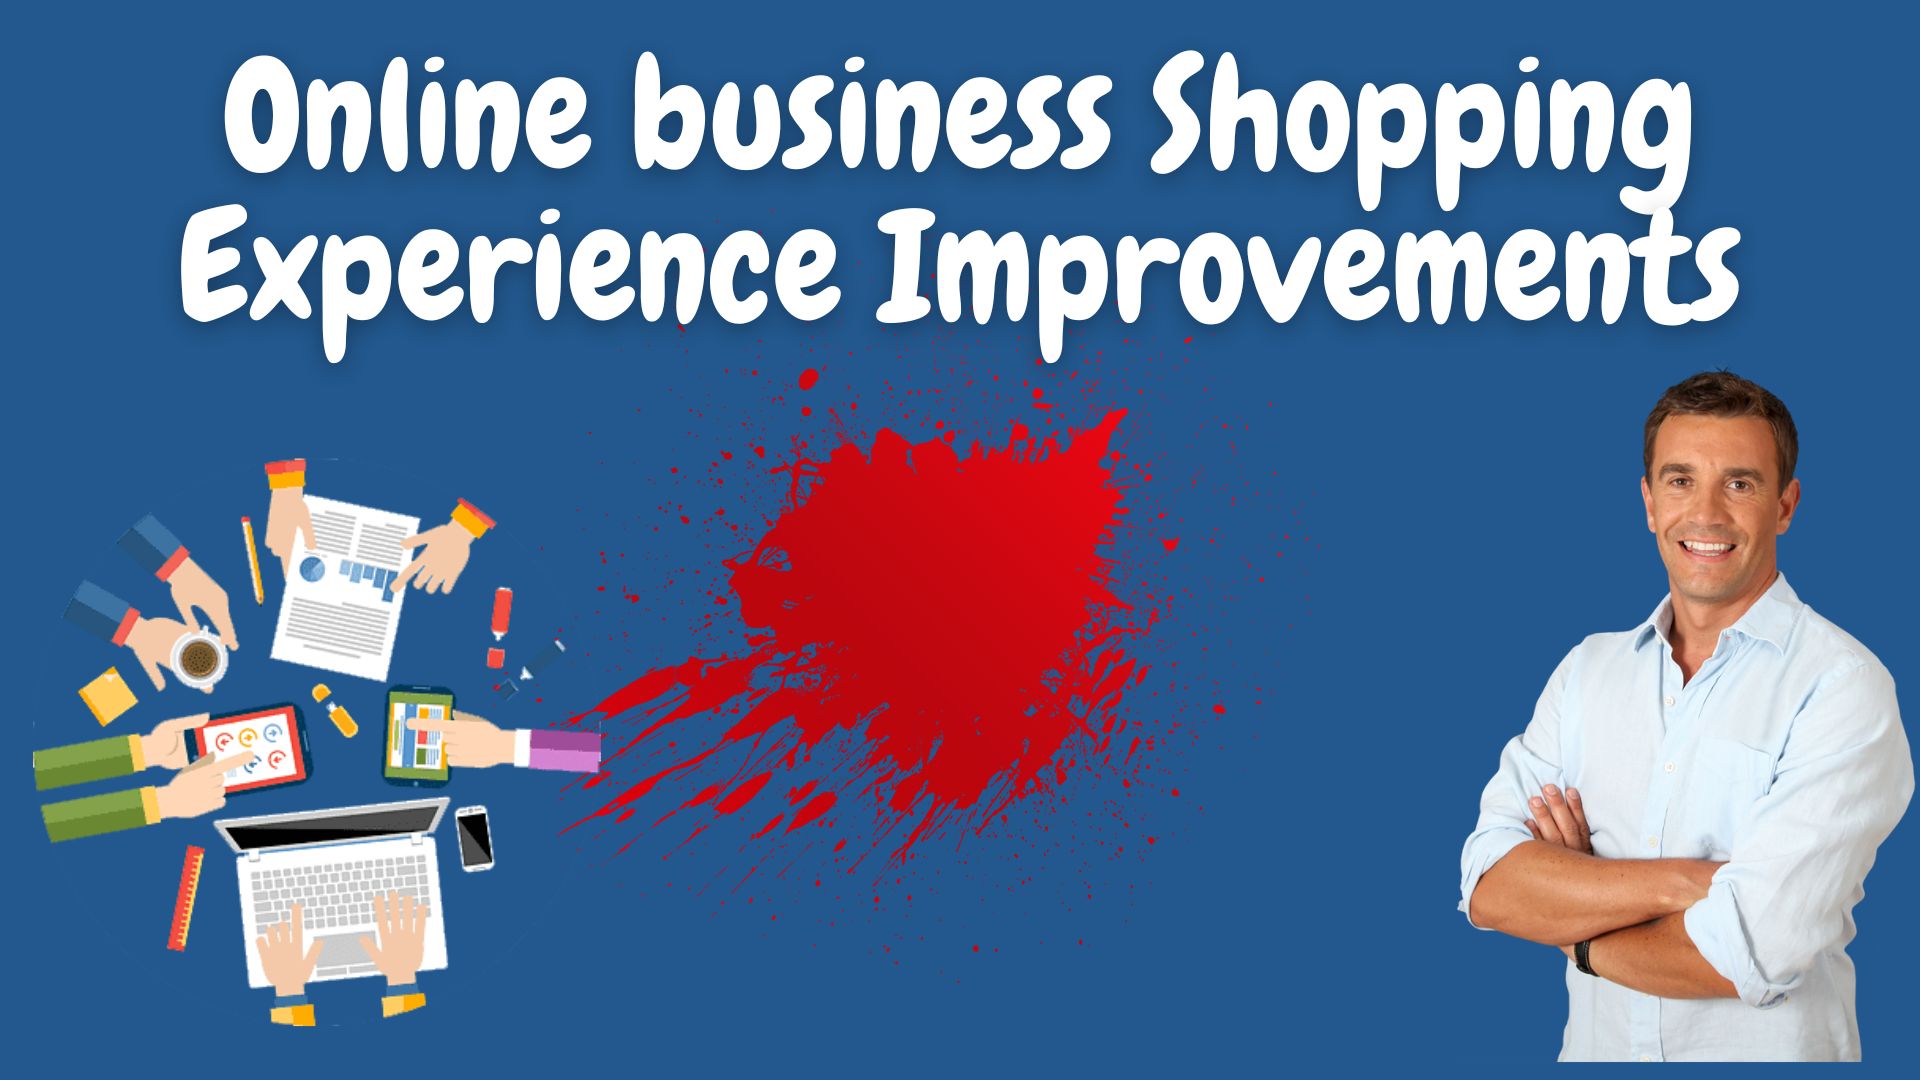 Online business shopping experience improvements